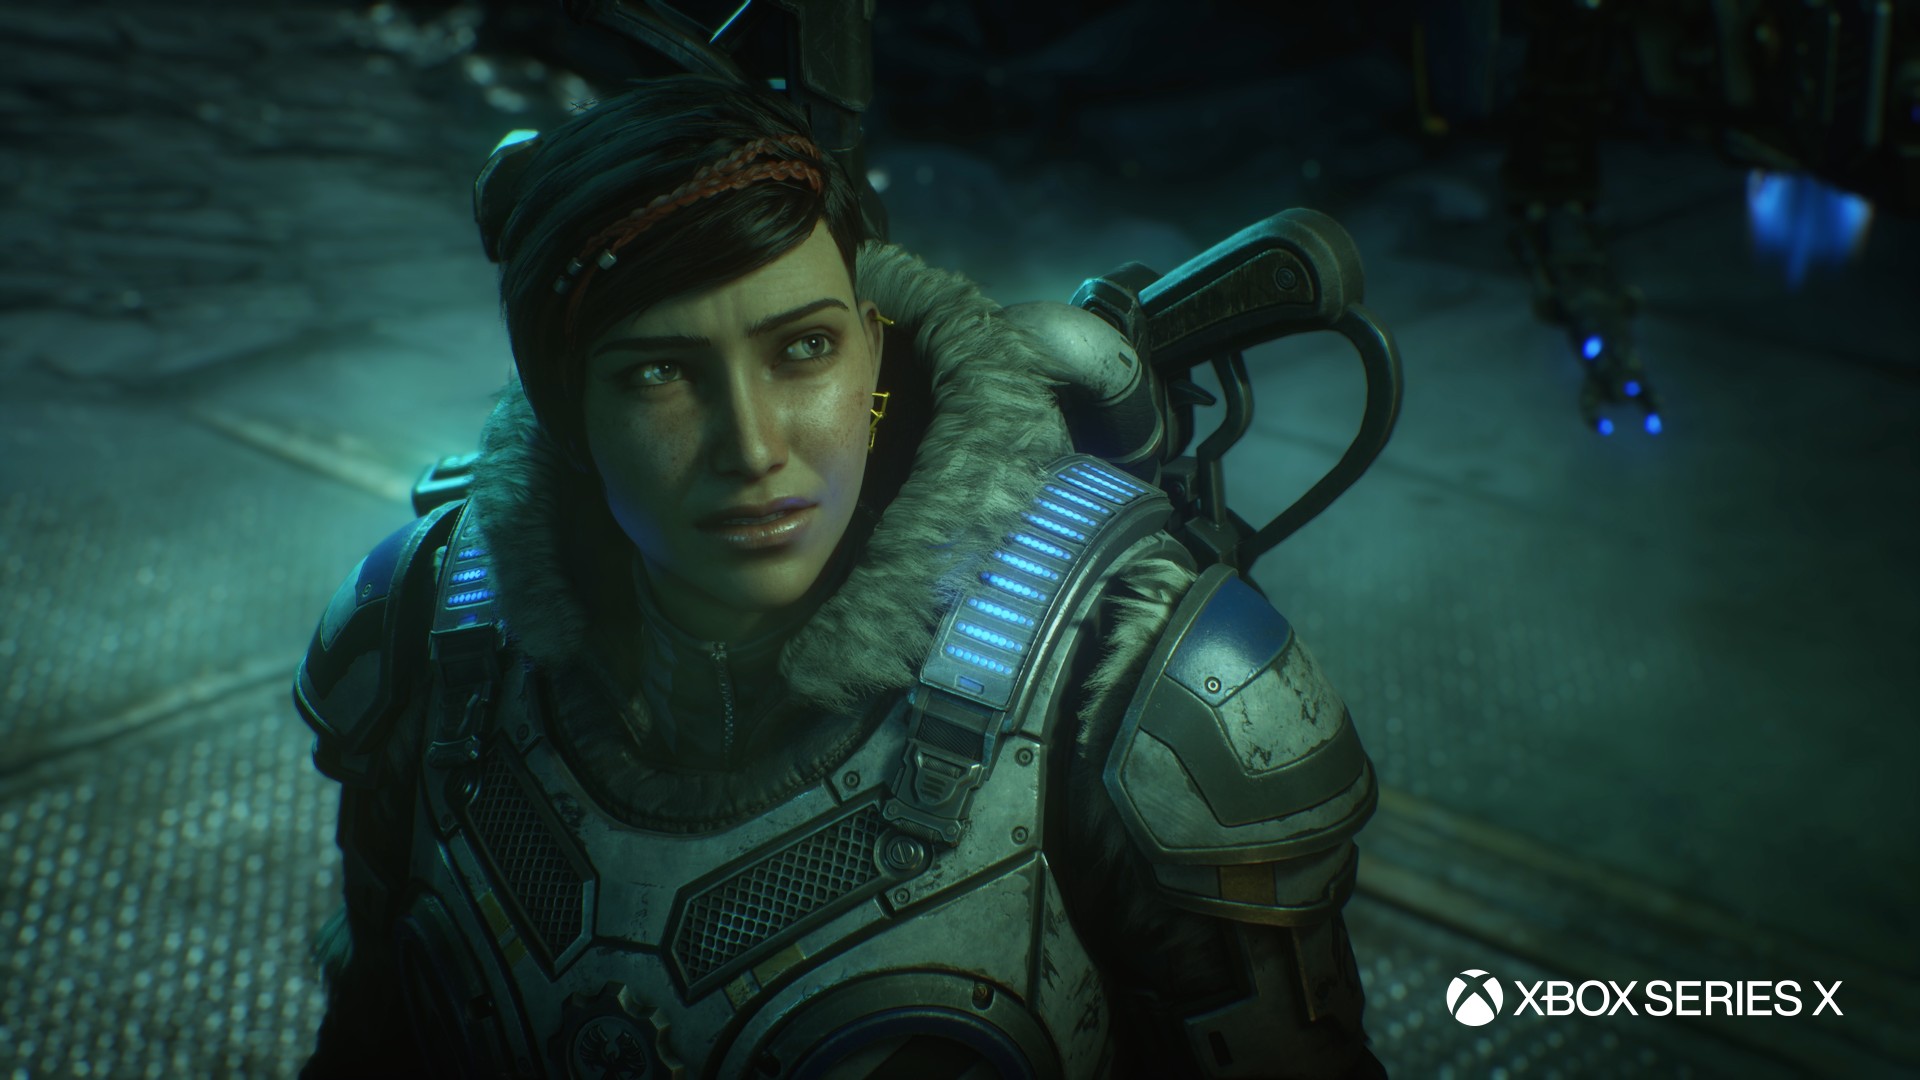 Gears 5 Relaunches on Xbox Series X